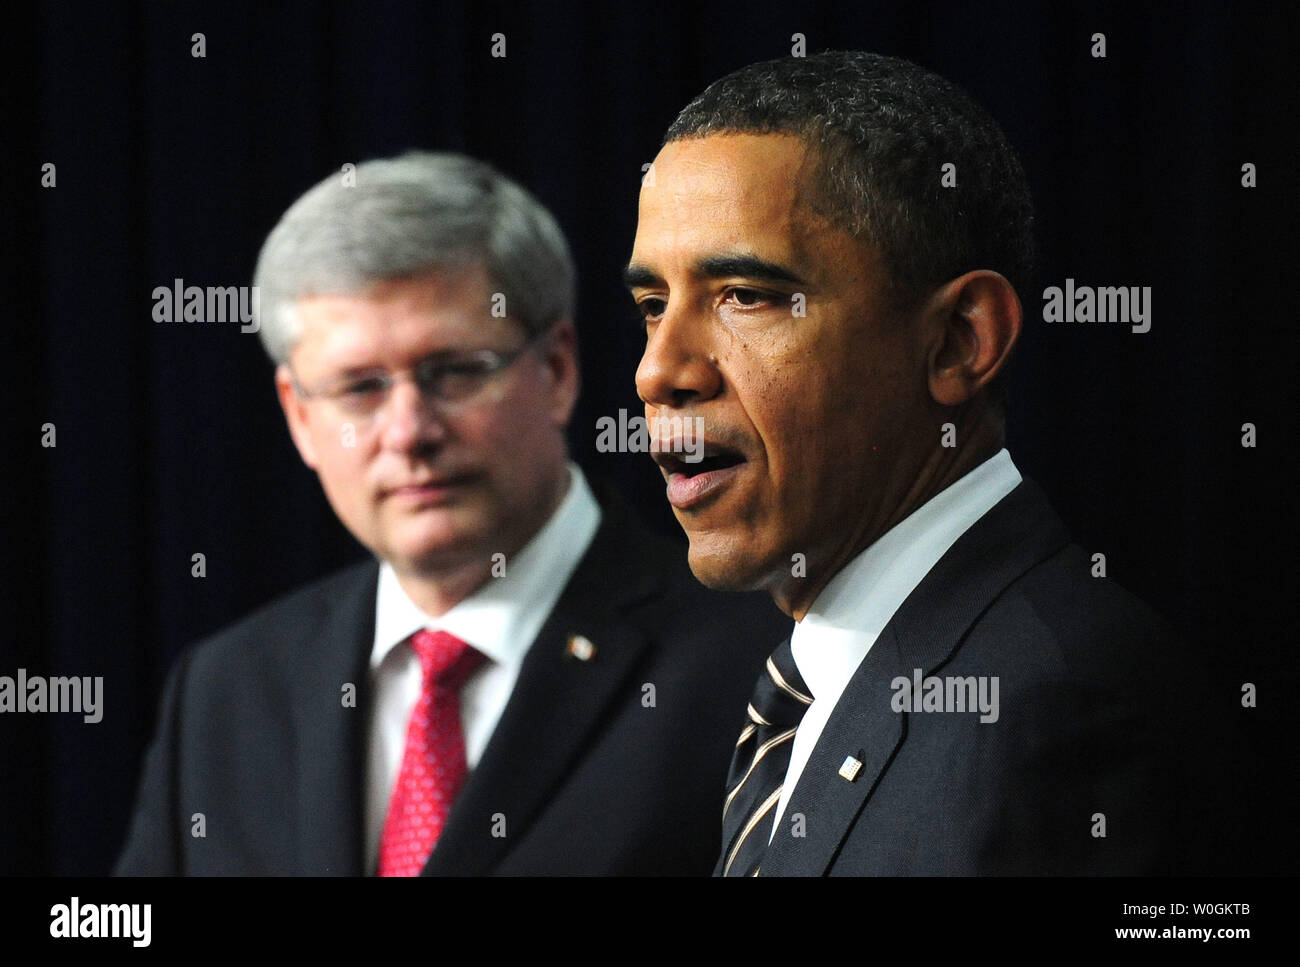 U.S. President Barack Obama speaks alongside Canadian Prime Minister Stephen Harper during a joint press statement in the Eisenhower Executive Office Building in Washington on December 7, 2011. The two leaders announced their countries would ease restrictions on trade and travel.  UPI/Kevin Dietsch Stock Photo